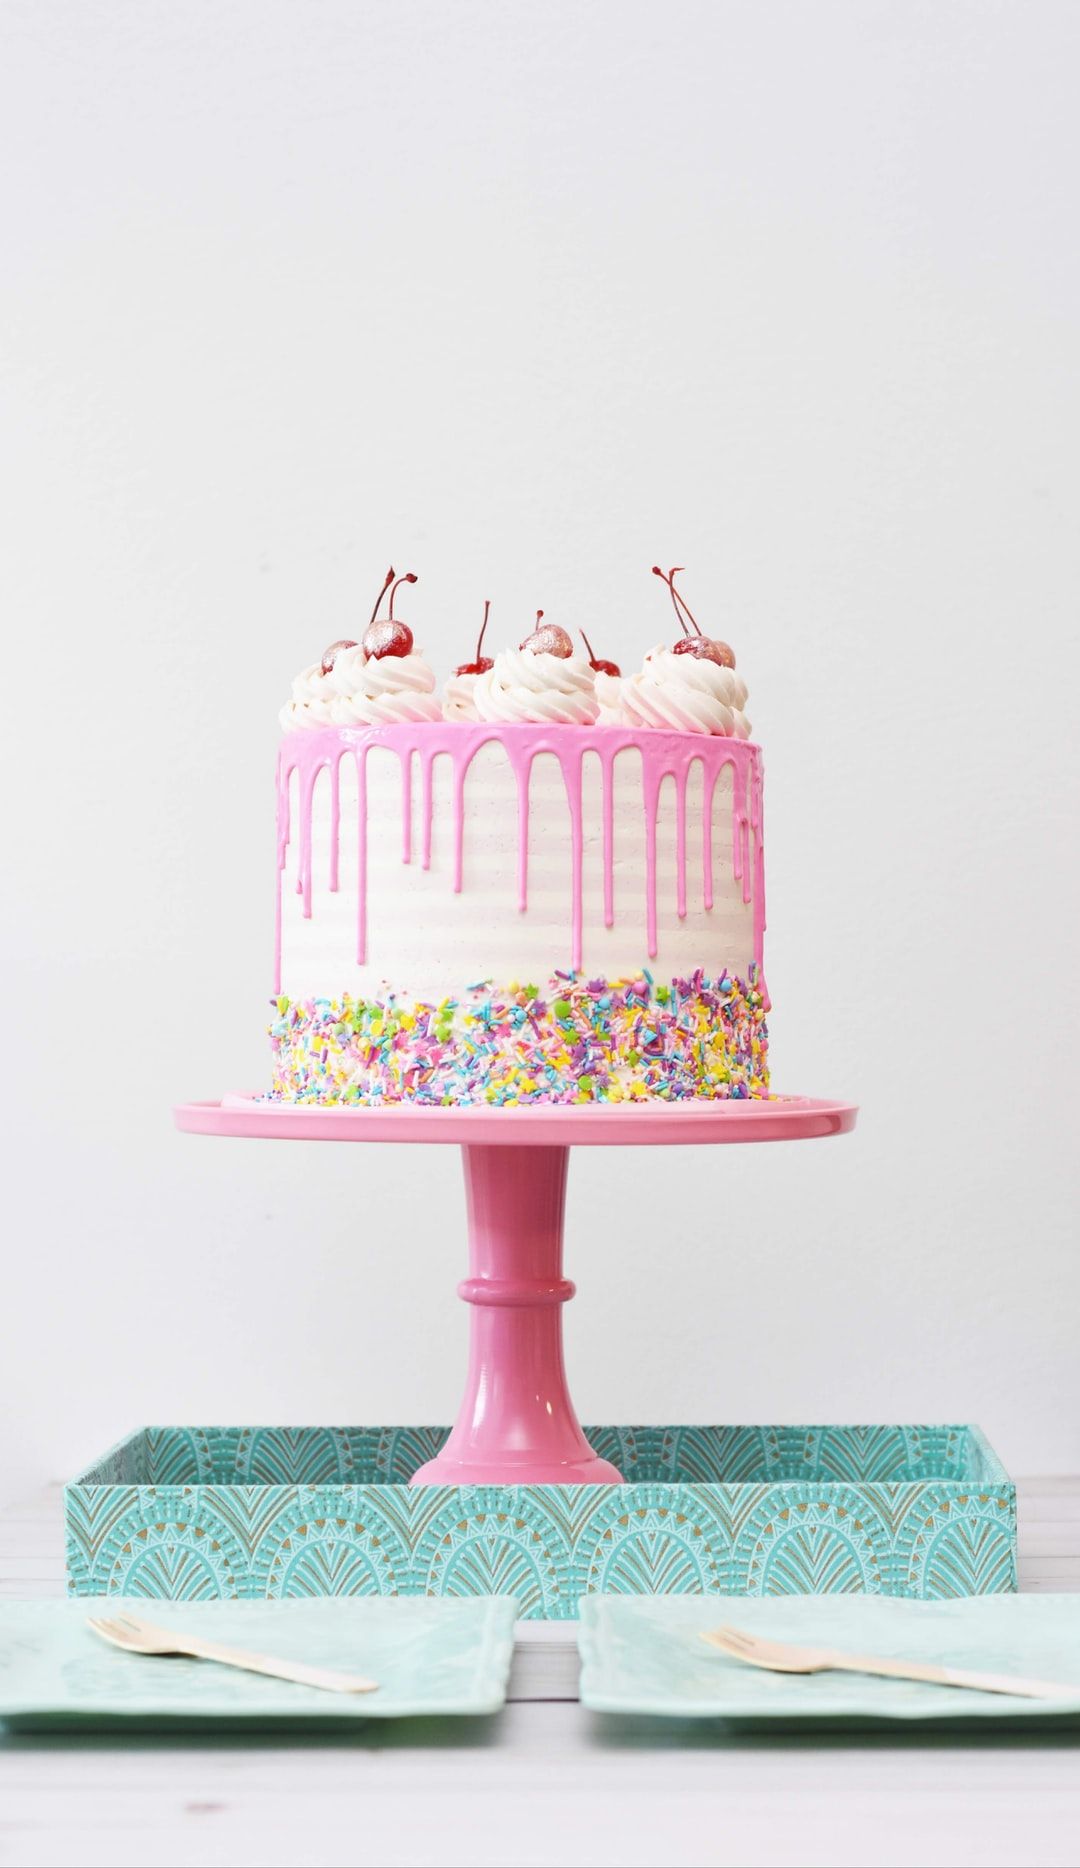 Birthday Cake Picture. Download Free Image